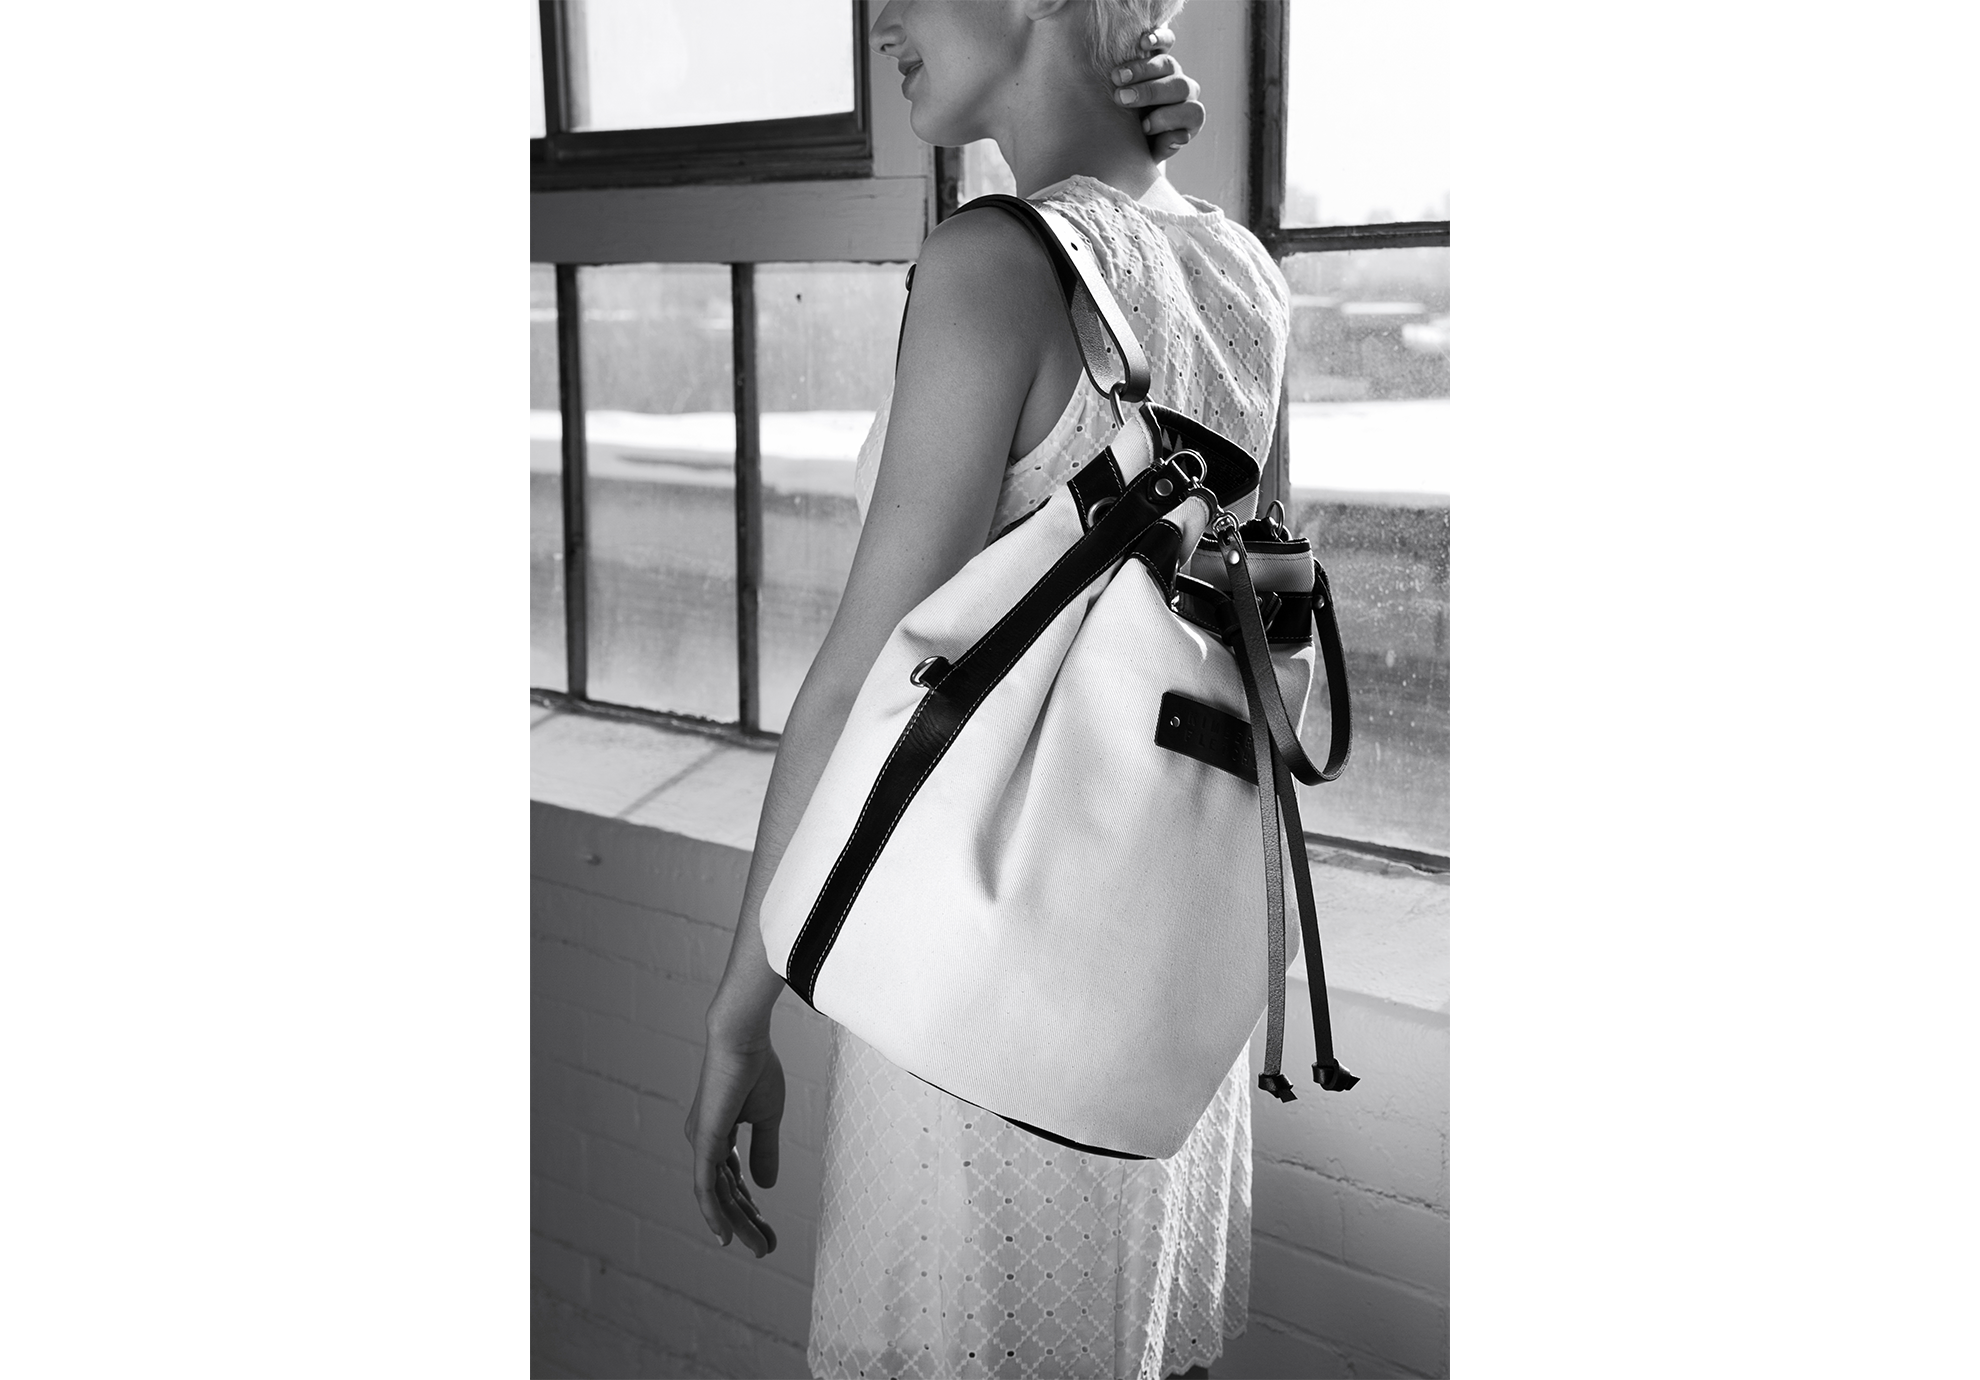 Betty Shoulder bag leather and canvas handmade in Canada made by hand in Montreal Designer handbags Kimberly Fletcher